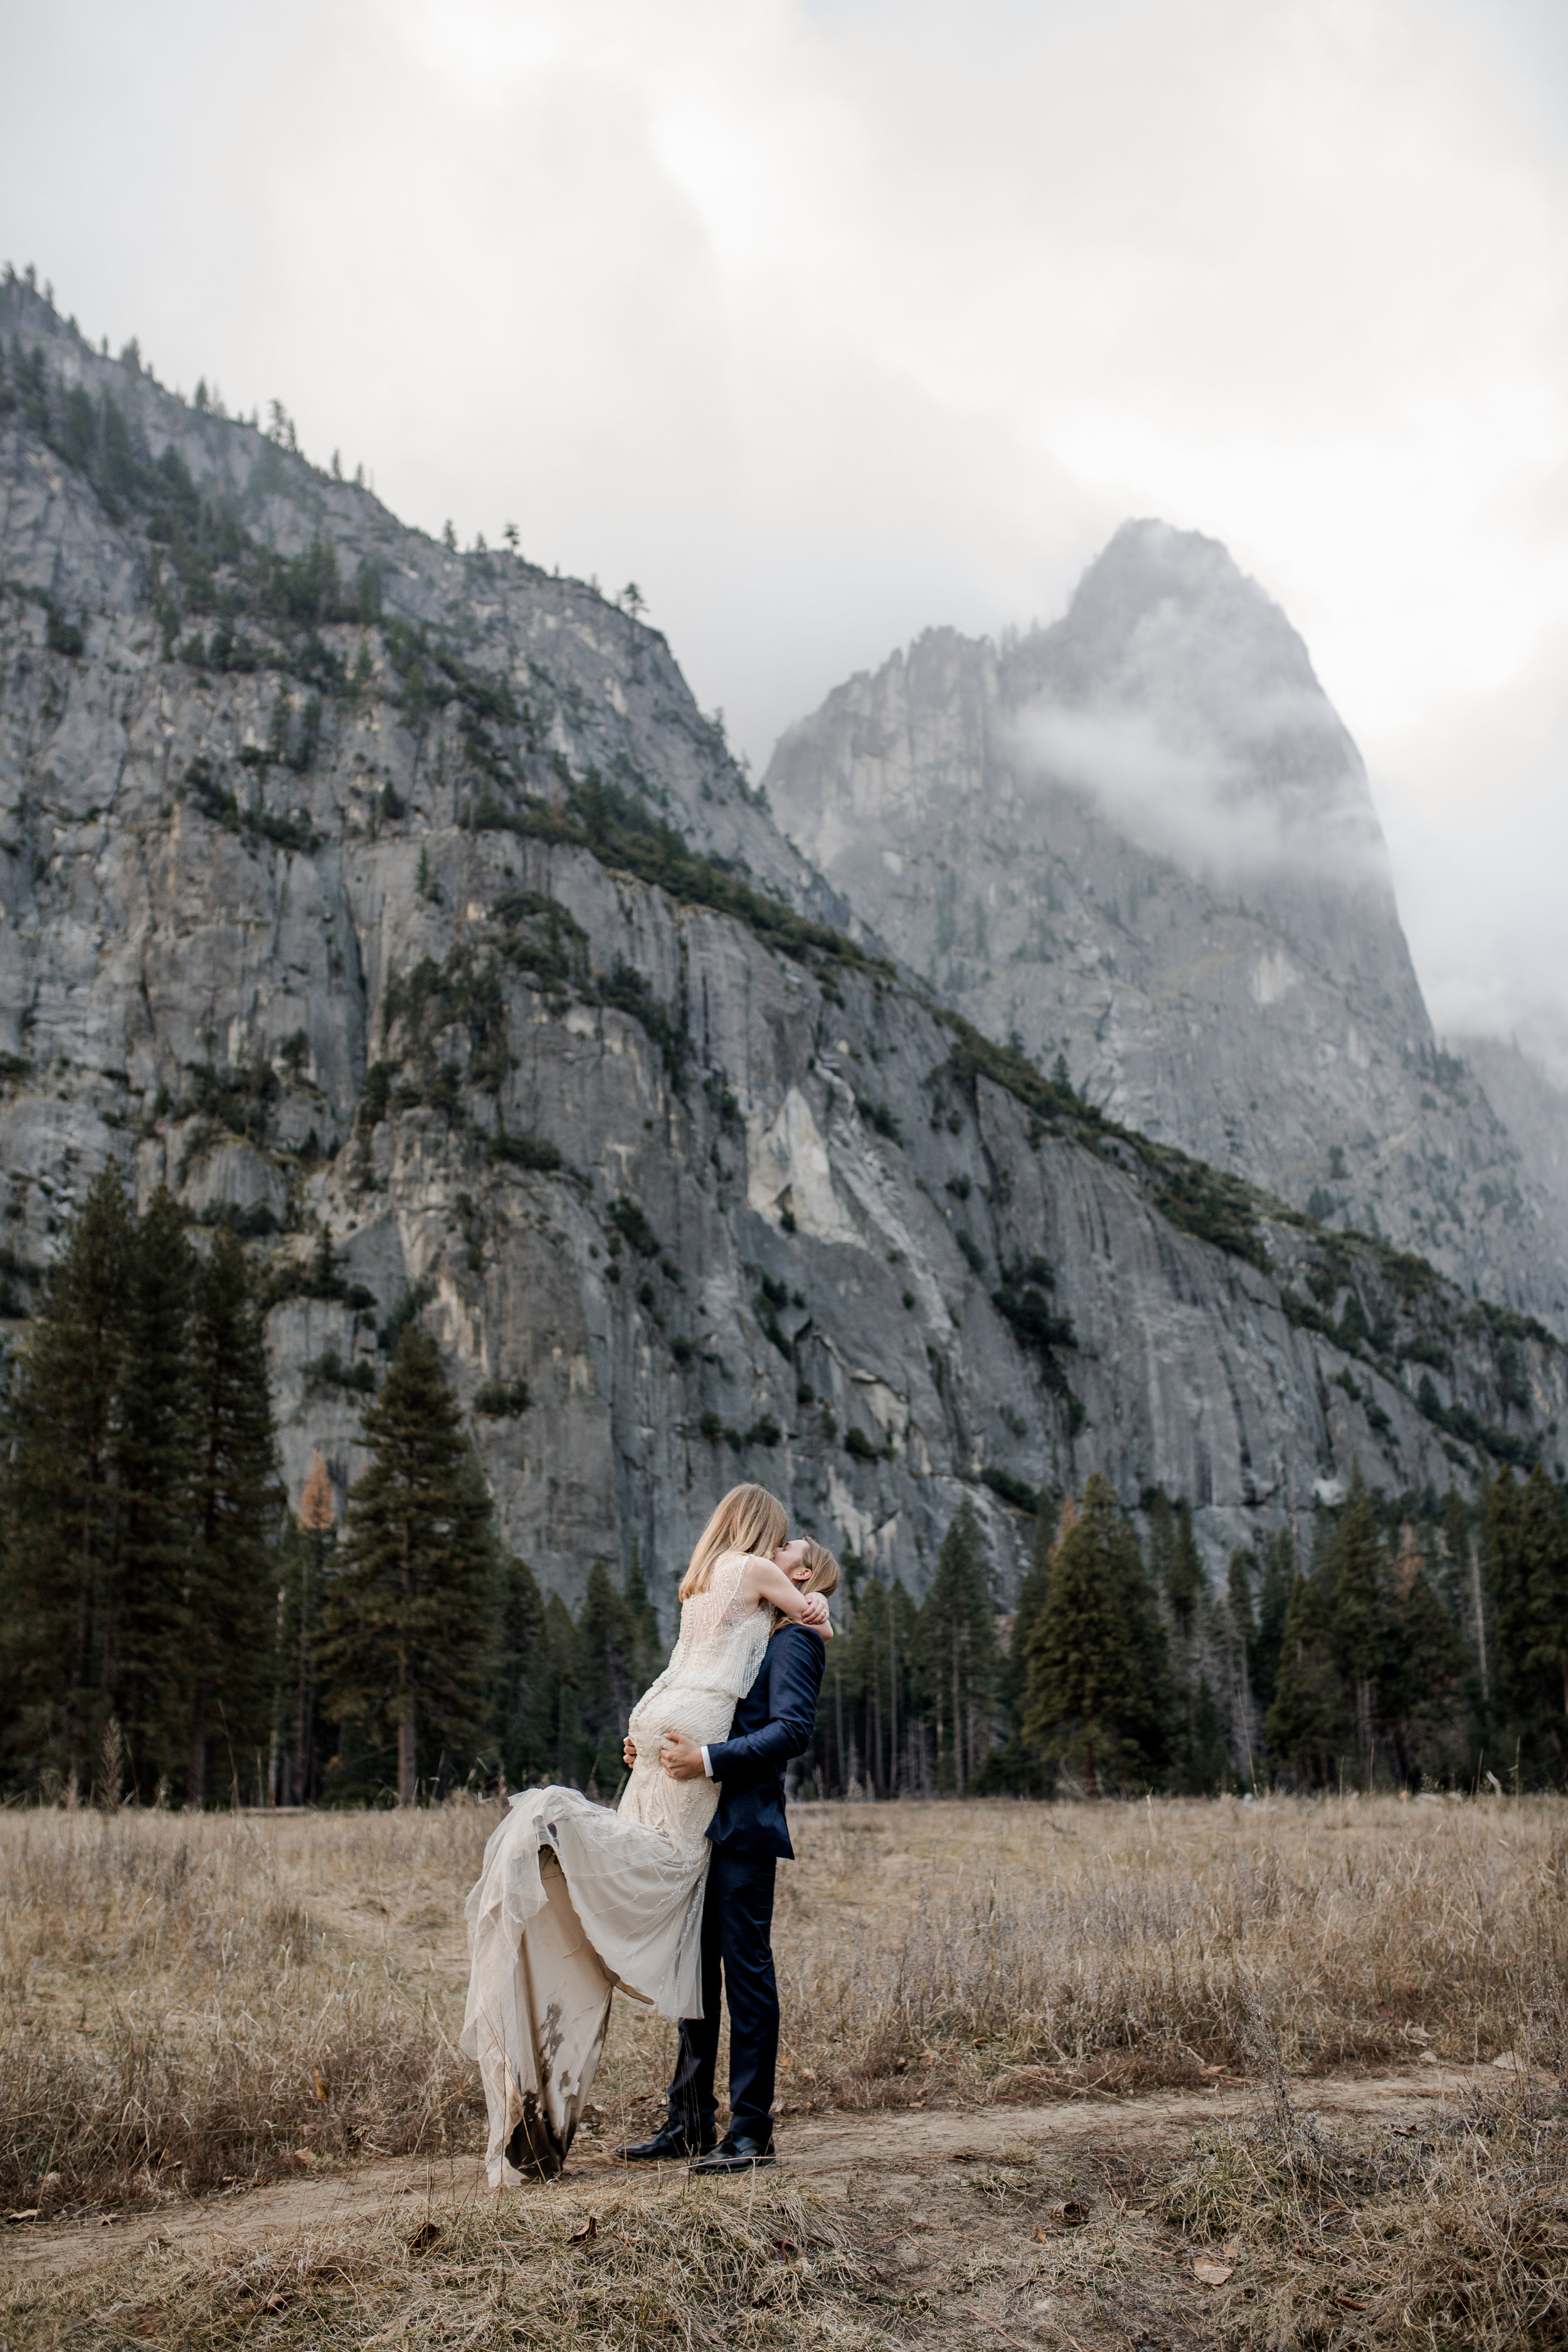 nicole-daacke-photography-yousemite-national-park-elopement-photographer-winter-cloud-moody-elope-inspiration-yosemite-valley-tunnel-view-winter-cloud-fog-weather-wedding-photos-66.jpg